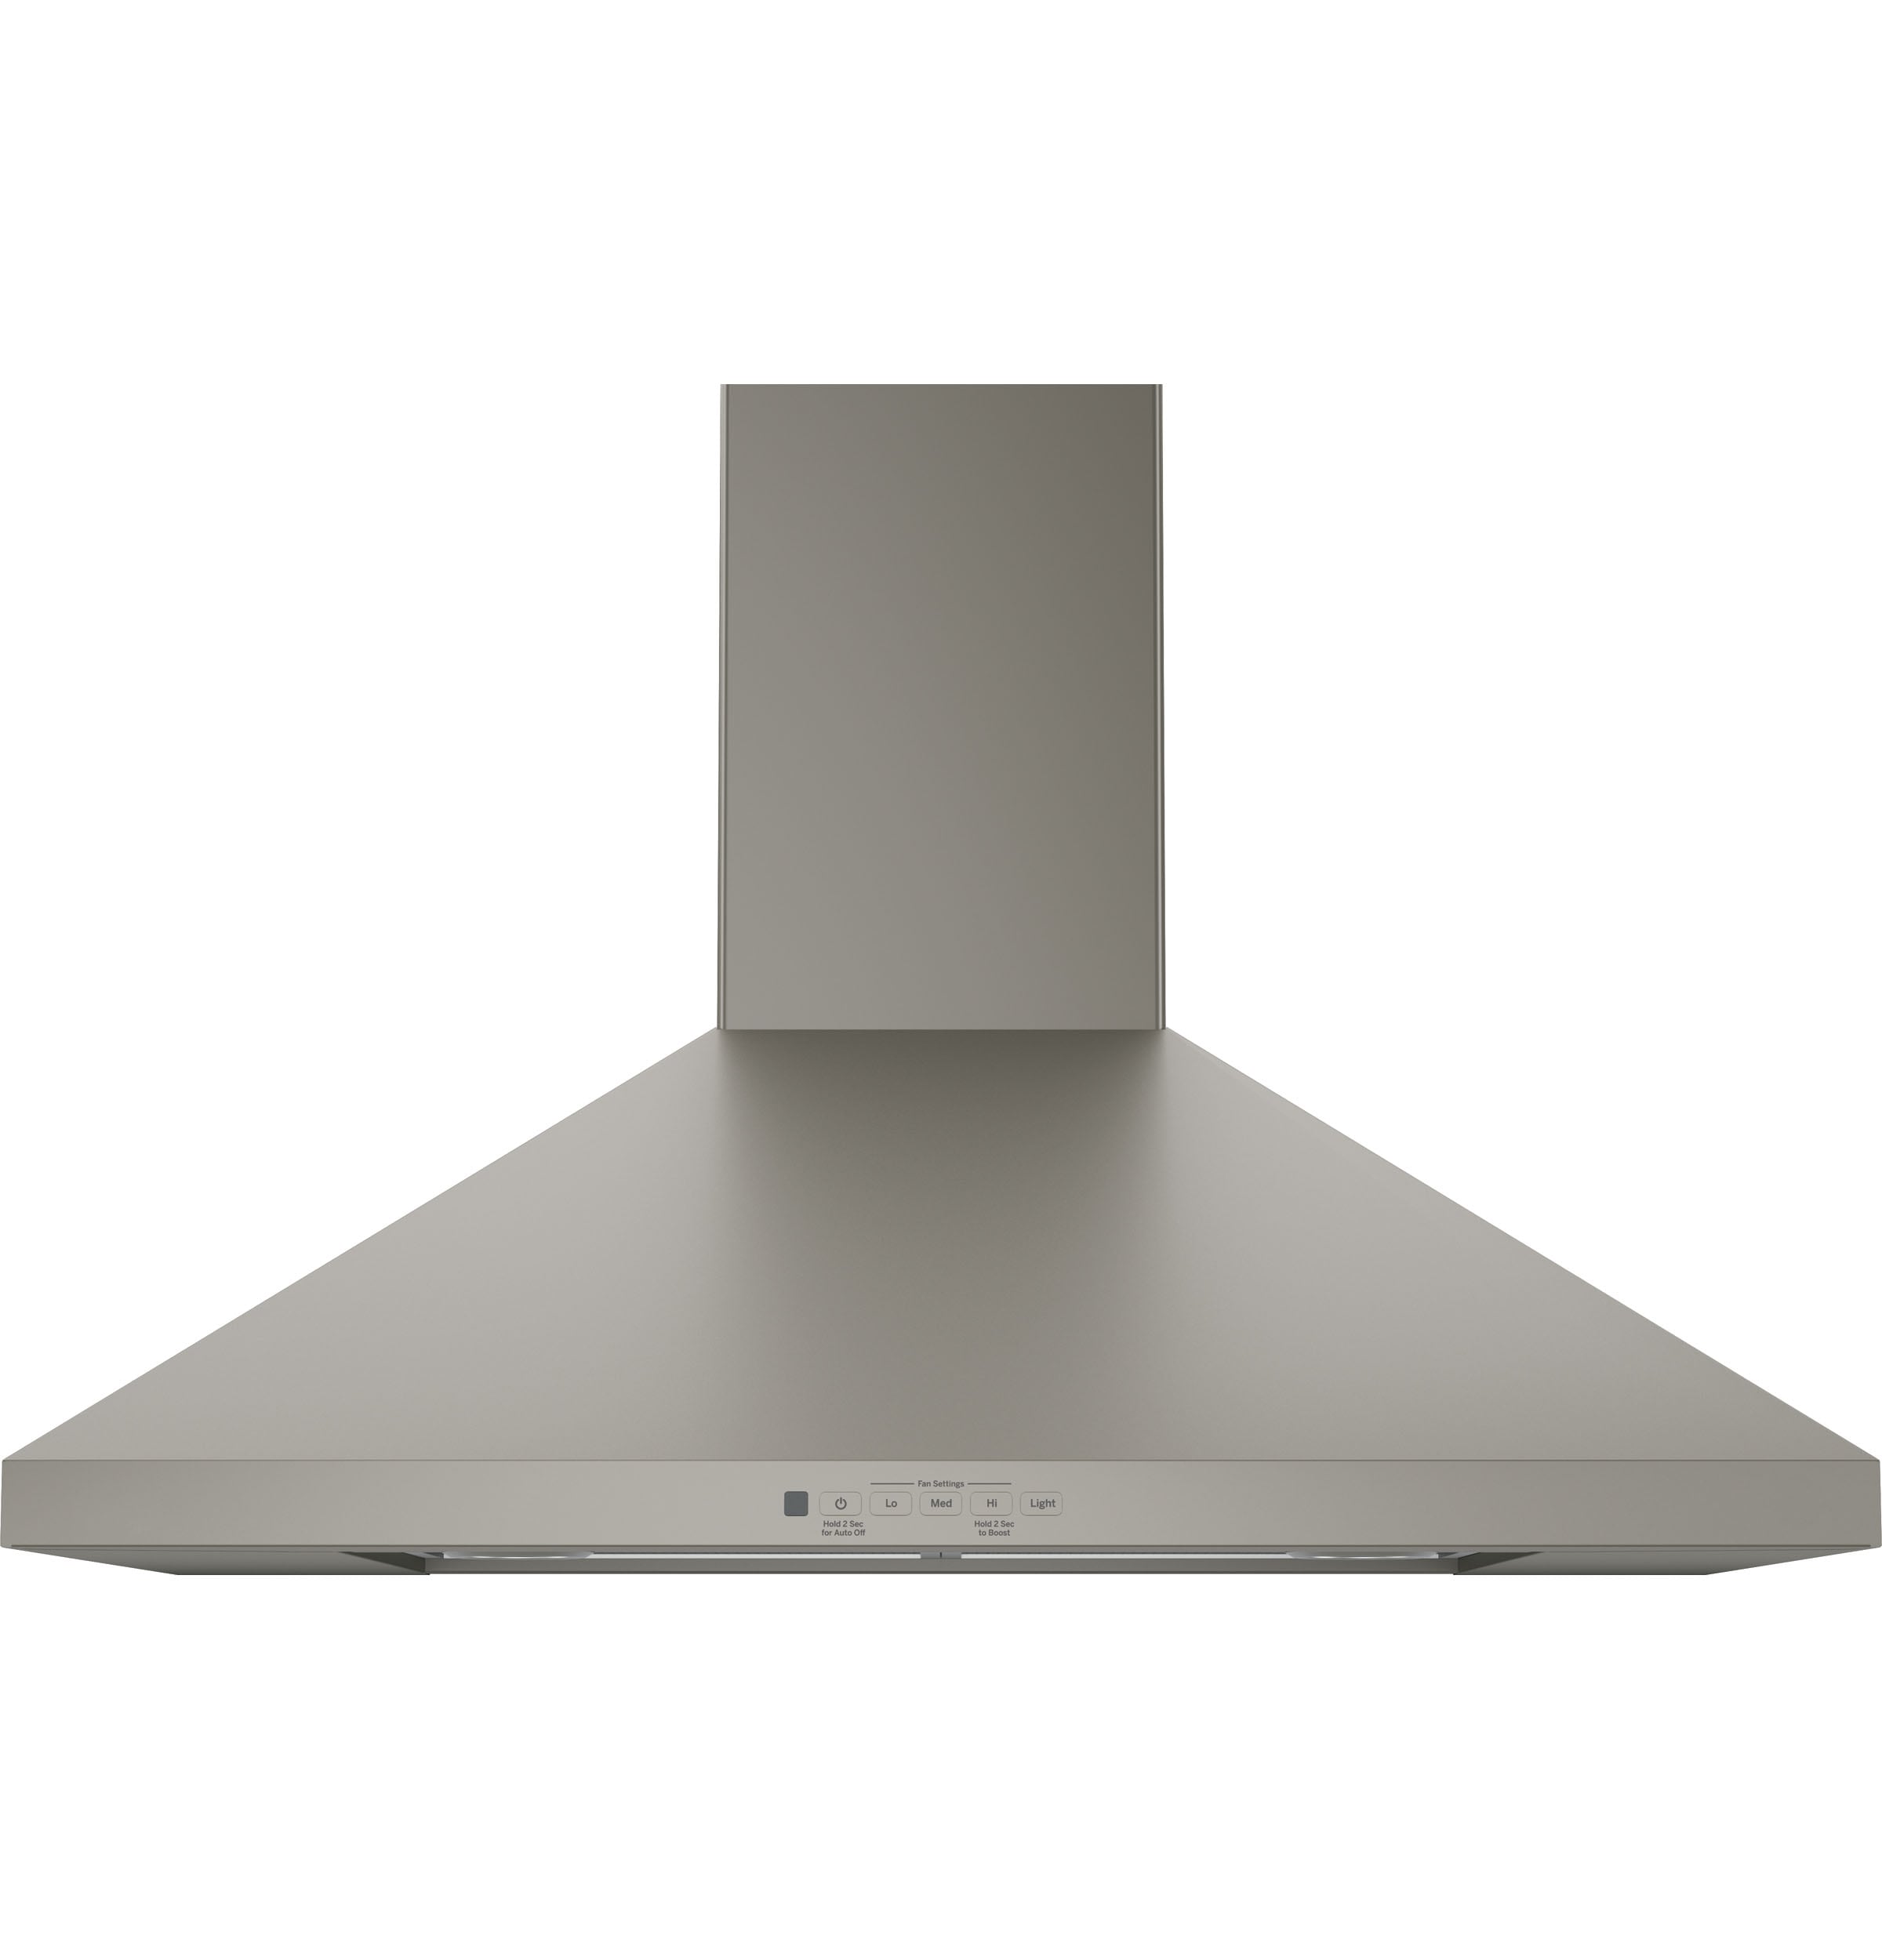 Can I clean range hood exhaust duct without reaching it? - Home Improvement  Stack Exchange